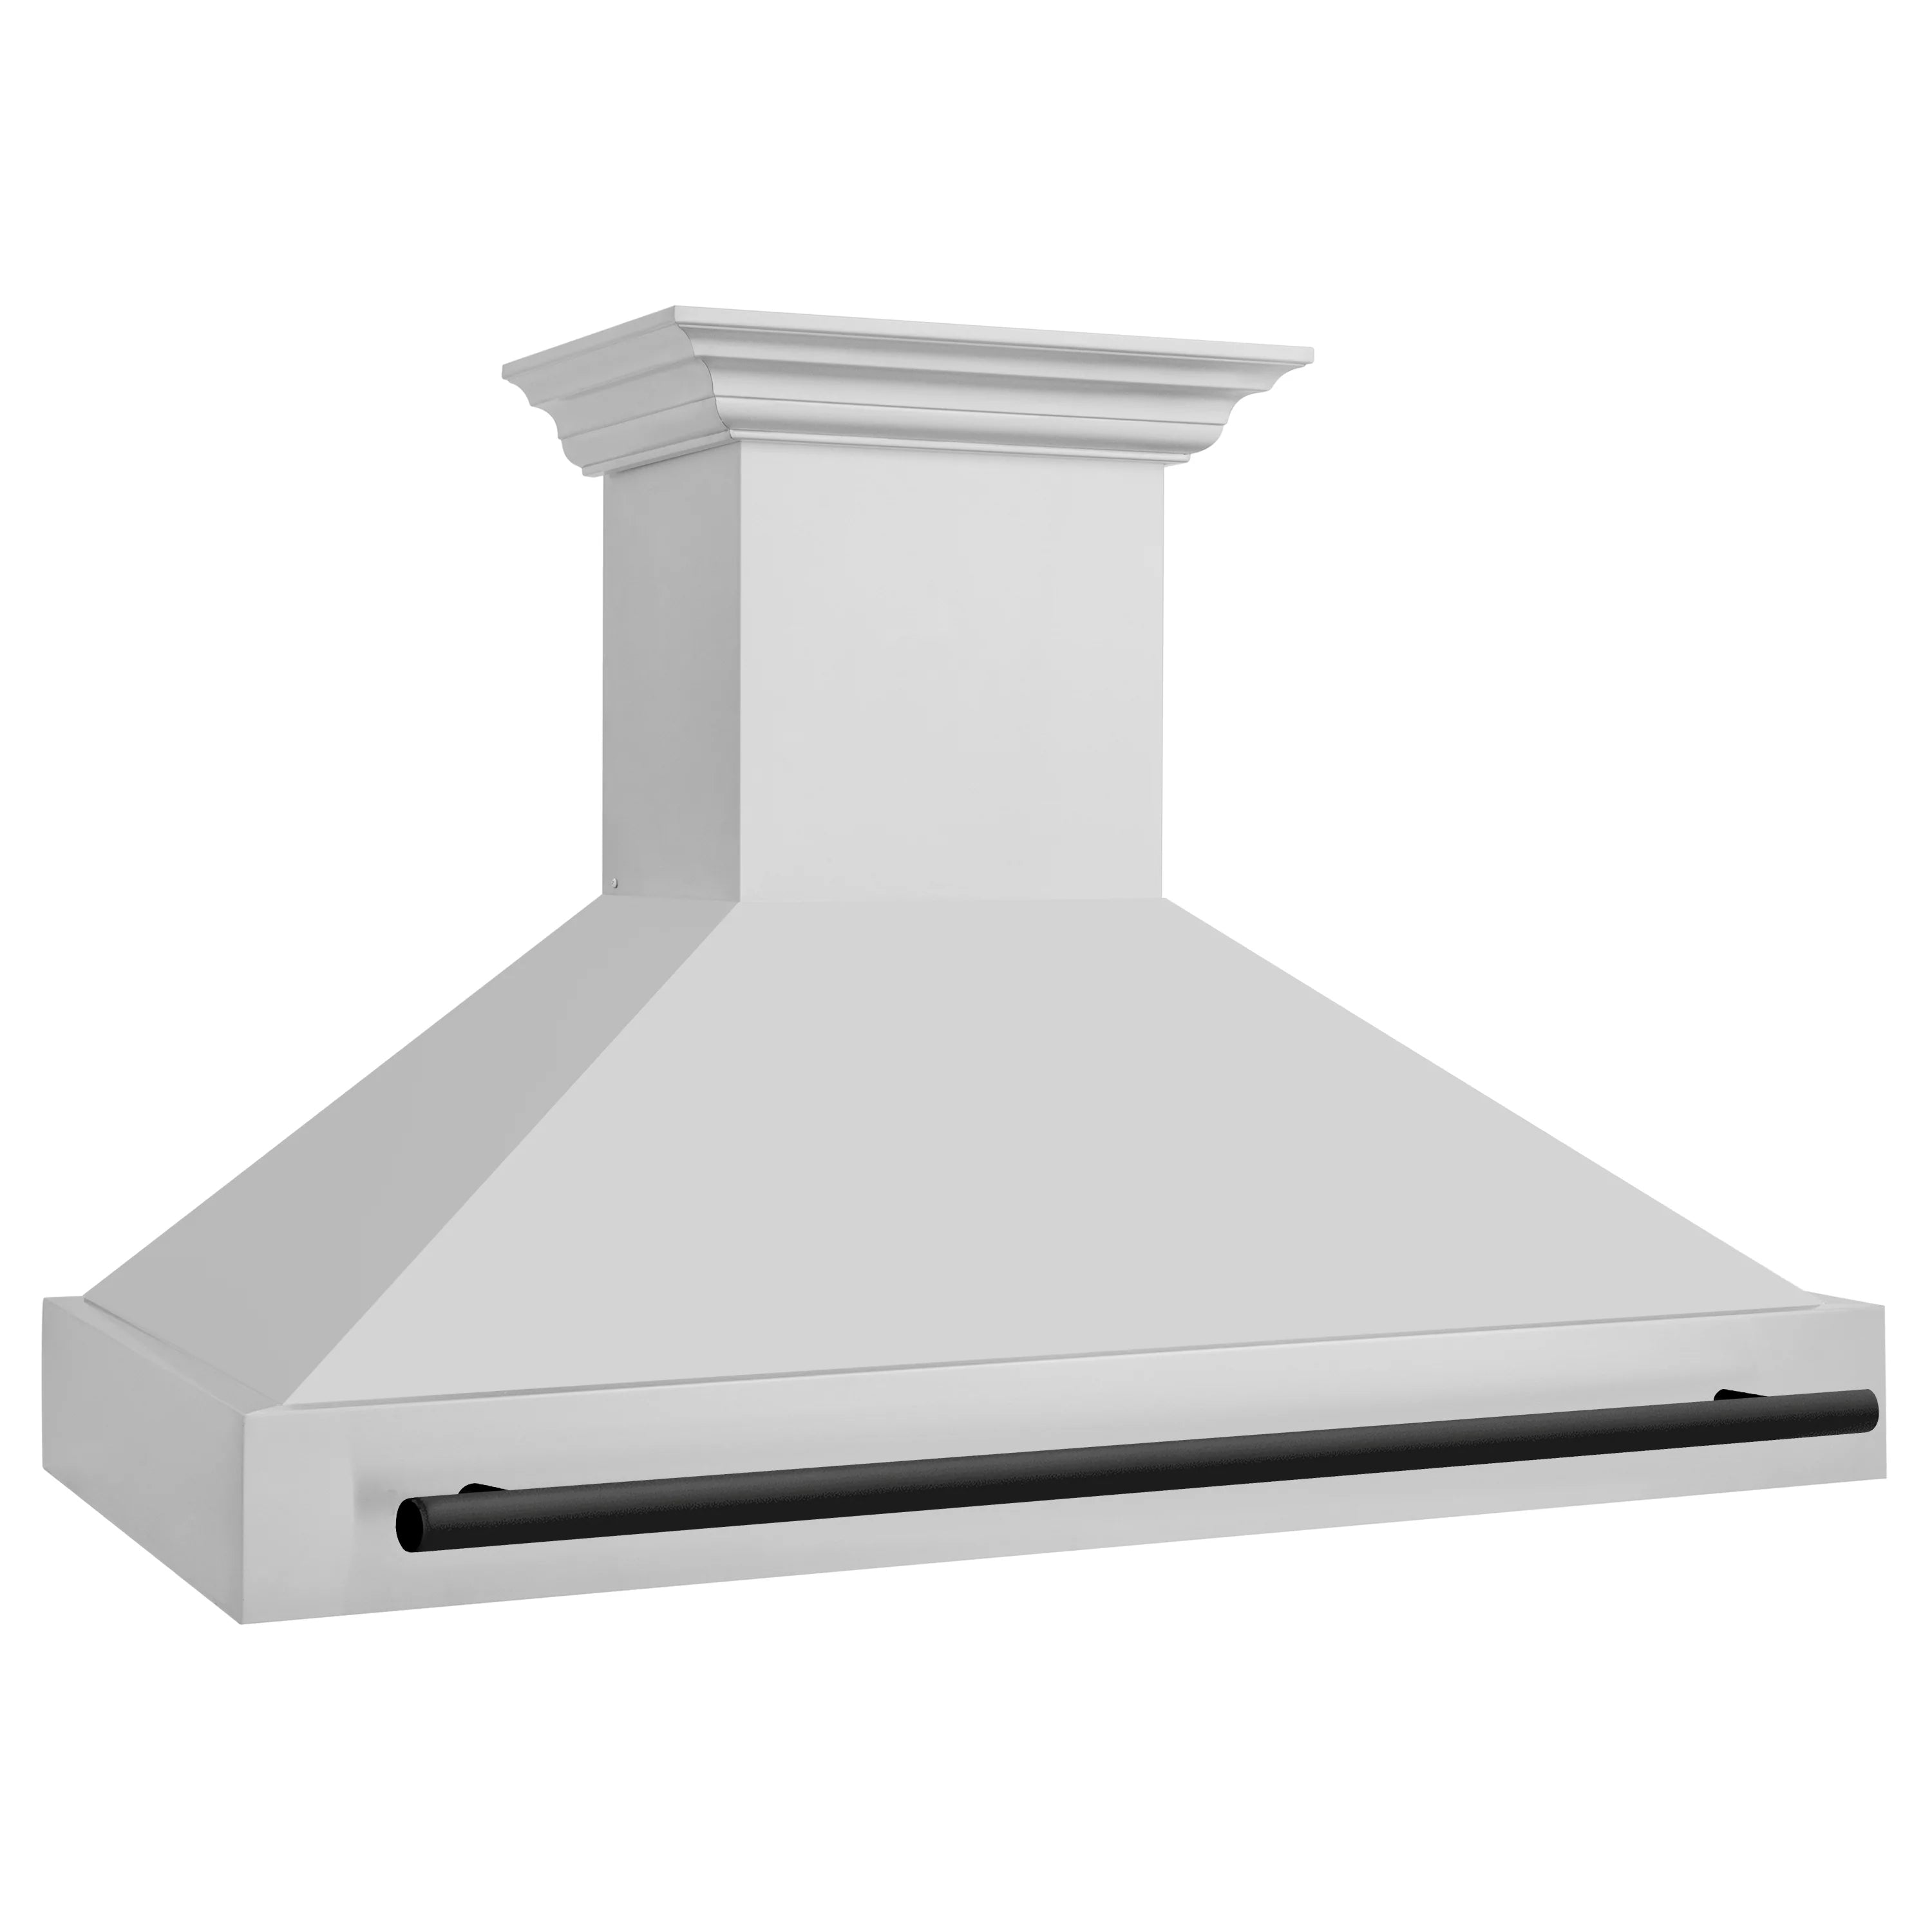 ZLINE 48" Autograph Edition Stainless Steel Range Hood with Stainless Steel Shell and Handle - 8654STZ-48